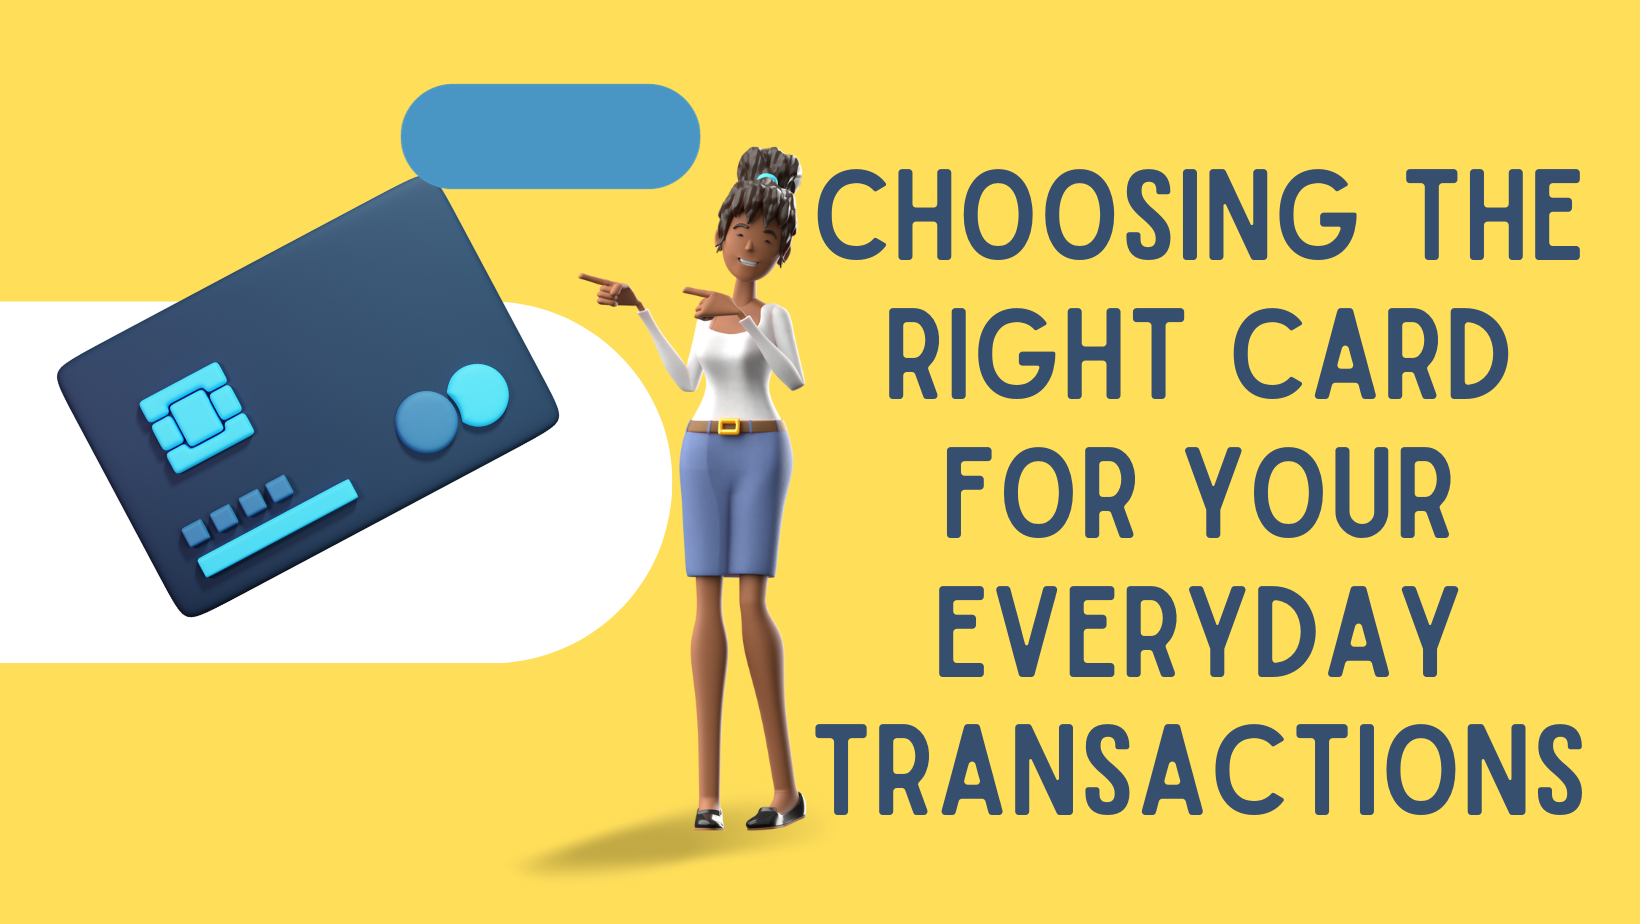 Debit Delight: Choosing the Right Card for Your Everyday Transactions